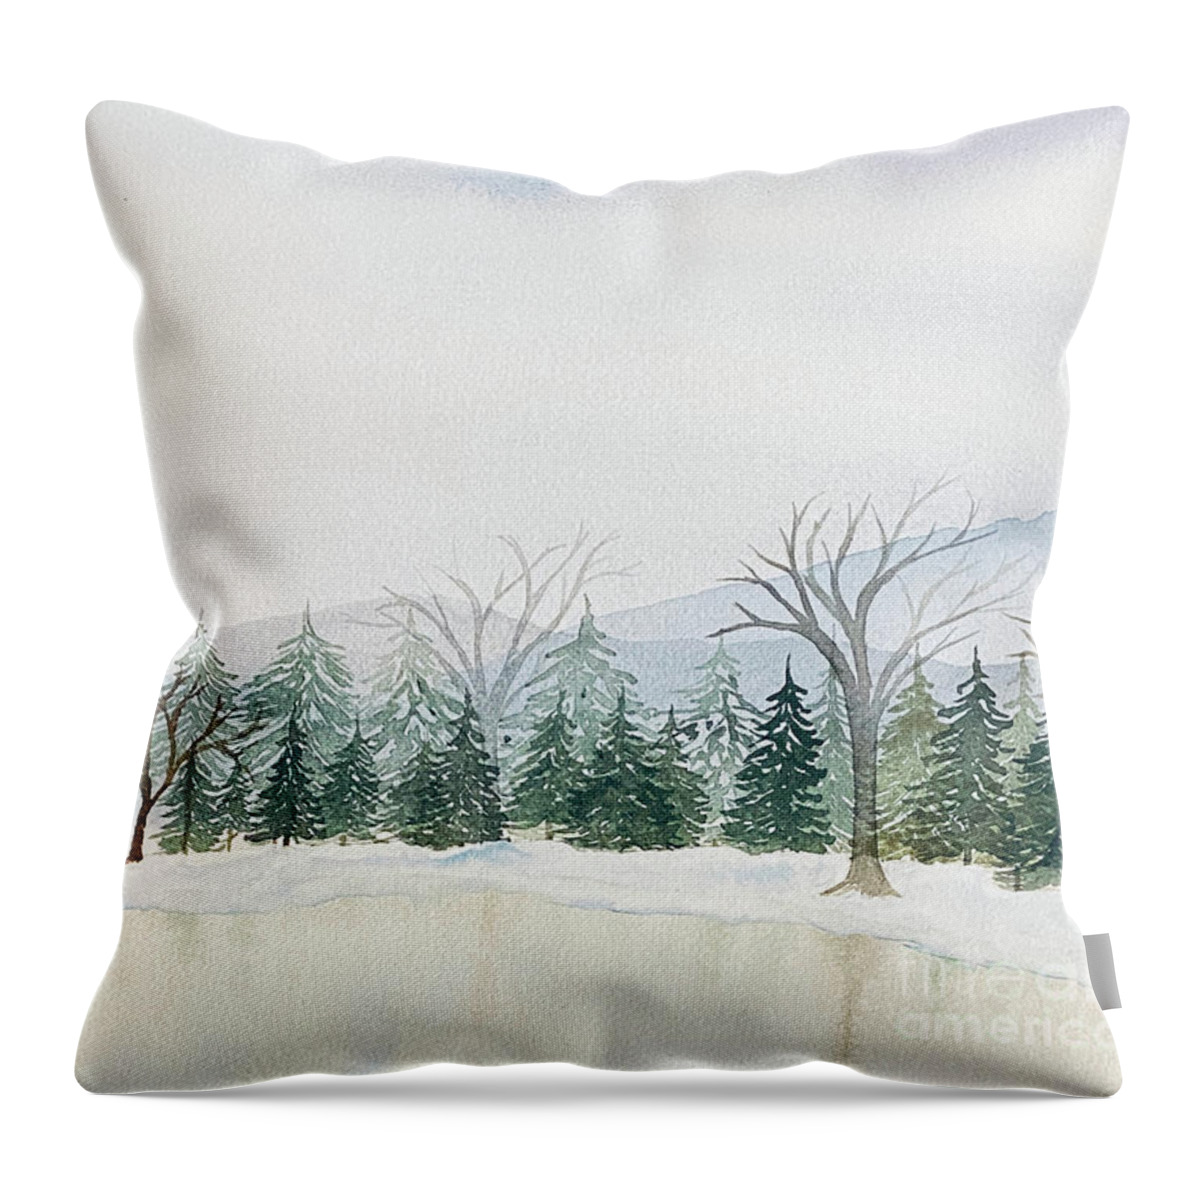 Snow Throw Pillow featuring the painting Snowy Mountain Lake by Lisa Neuman